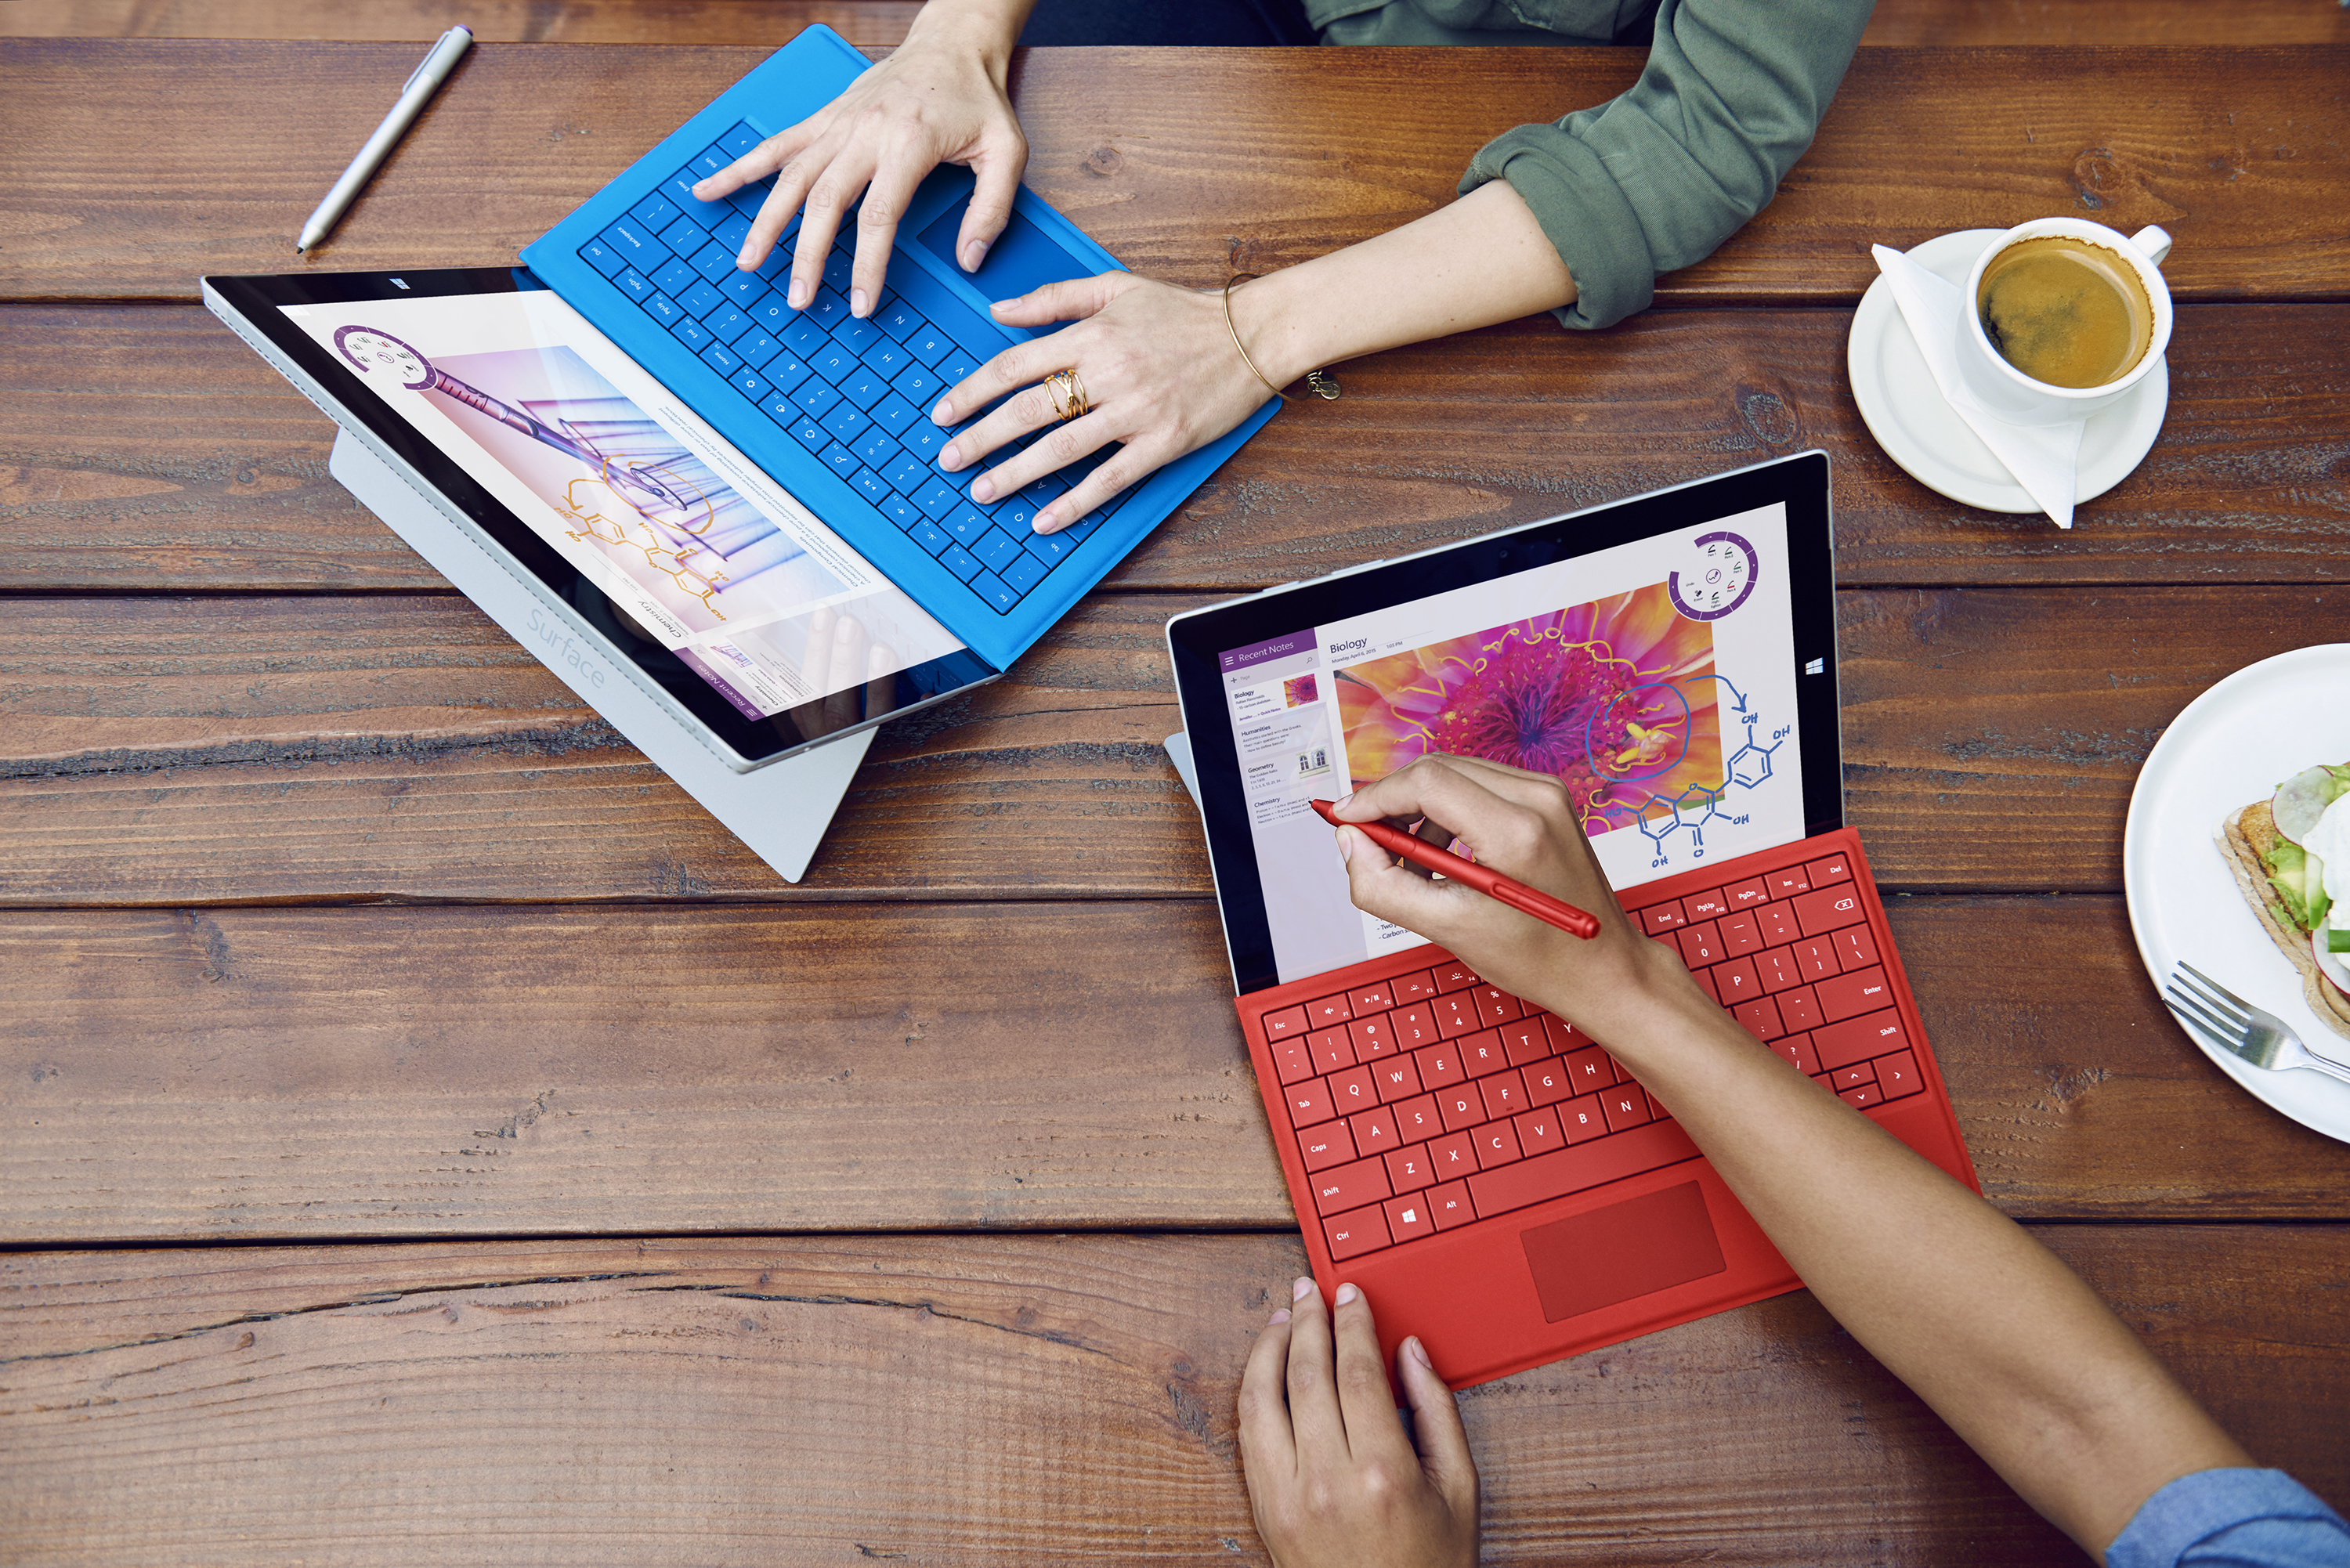 Surface 3 available to buy